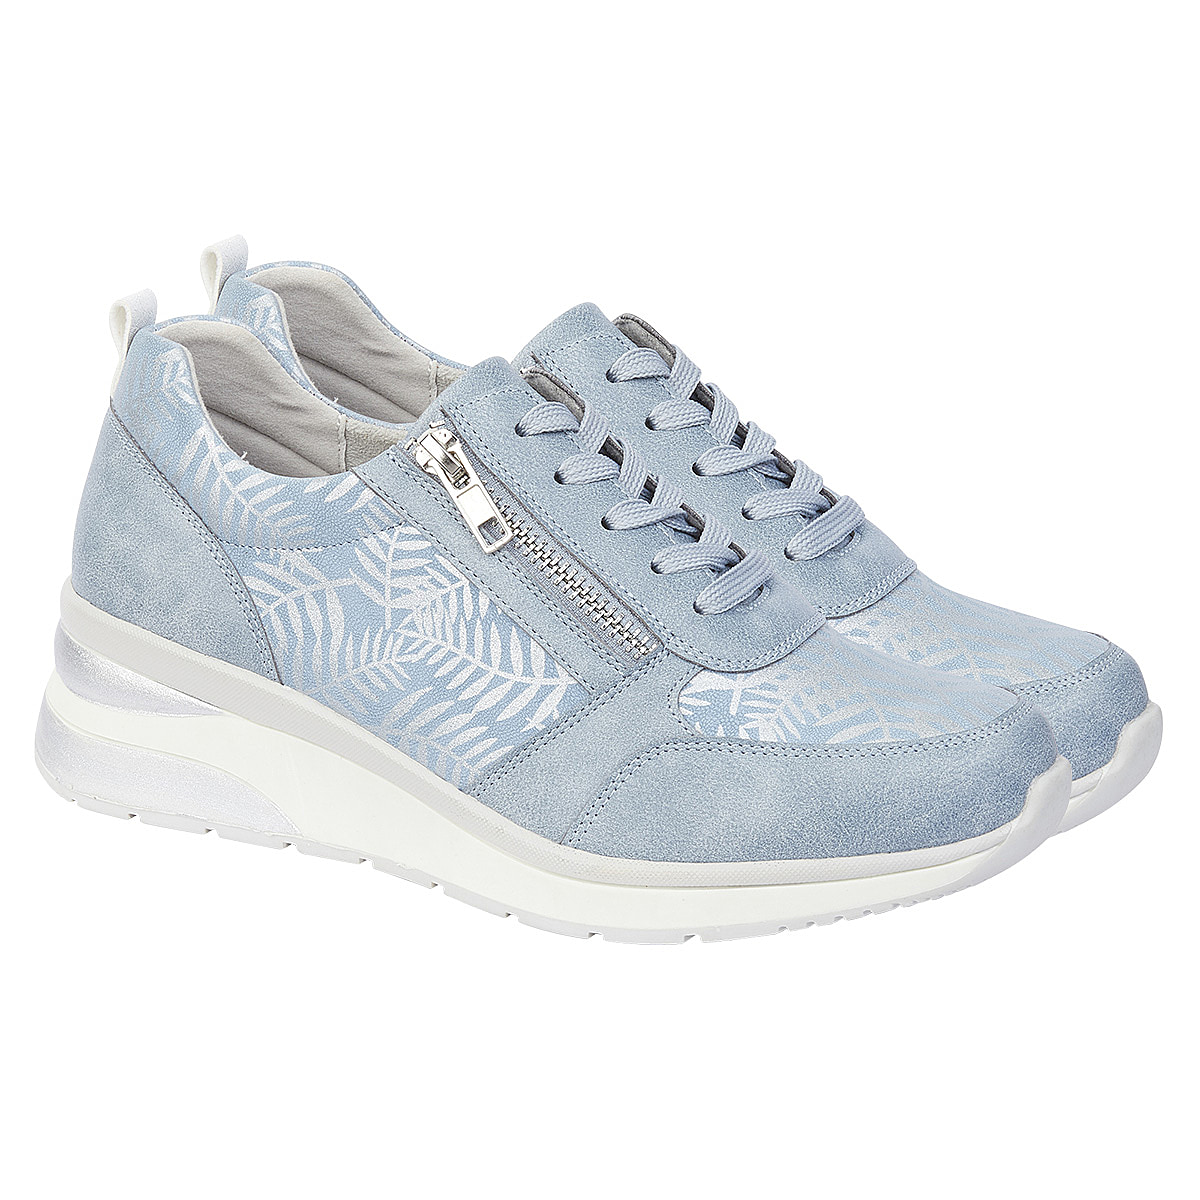 Lace Up Zip Fastening TROPICAL Ladies Shoes (Size 4) - Blue